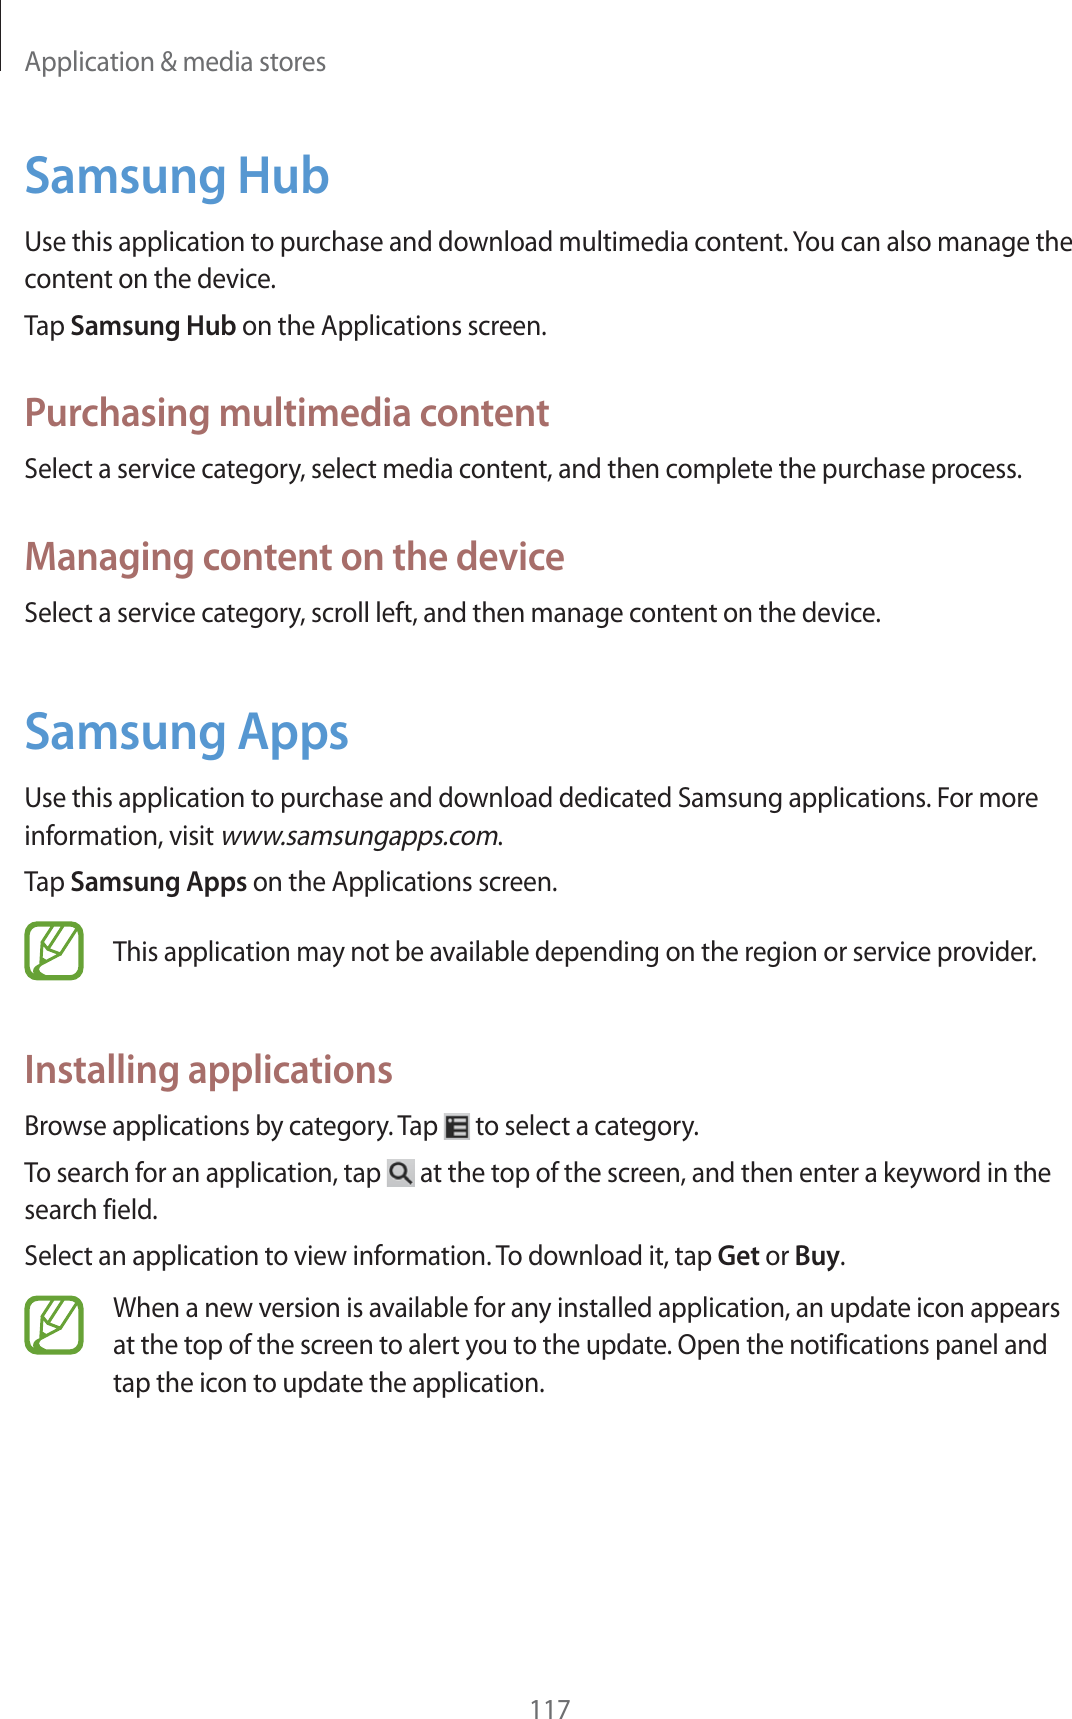 Application &amp; media stores117Samsung HubUse this application to purchase and download multimedia content. You can also manage the content on the device.Tap Samsung Hub on the Applications screen.Purchasing multimedia contentSelect a service category, select media content, and then complete the purchase process.Managing content on the deviceSelect a service category, scroll left, and then manage content on the device.Samsung AppsUse this application to purchase and download dedicated Samsung applications. For more information, visit www.samsungapps.com.Tap Samsung Apps on the Applications screen.This application may not be available depending on the region or service provider.Installing applicationsBrowse applications by category. Tap   to select a category.To search for an application, tap   at the top of the screen, and then enter a keyword in the search field.Select an application to view information. To download it, tap Get or Buy.When a new version is available for any installed application, an update icon appears at the top of the screen to alert you to the update. Open the notifications panel and tap the icon to update the application.